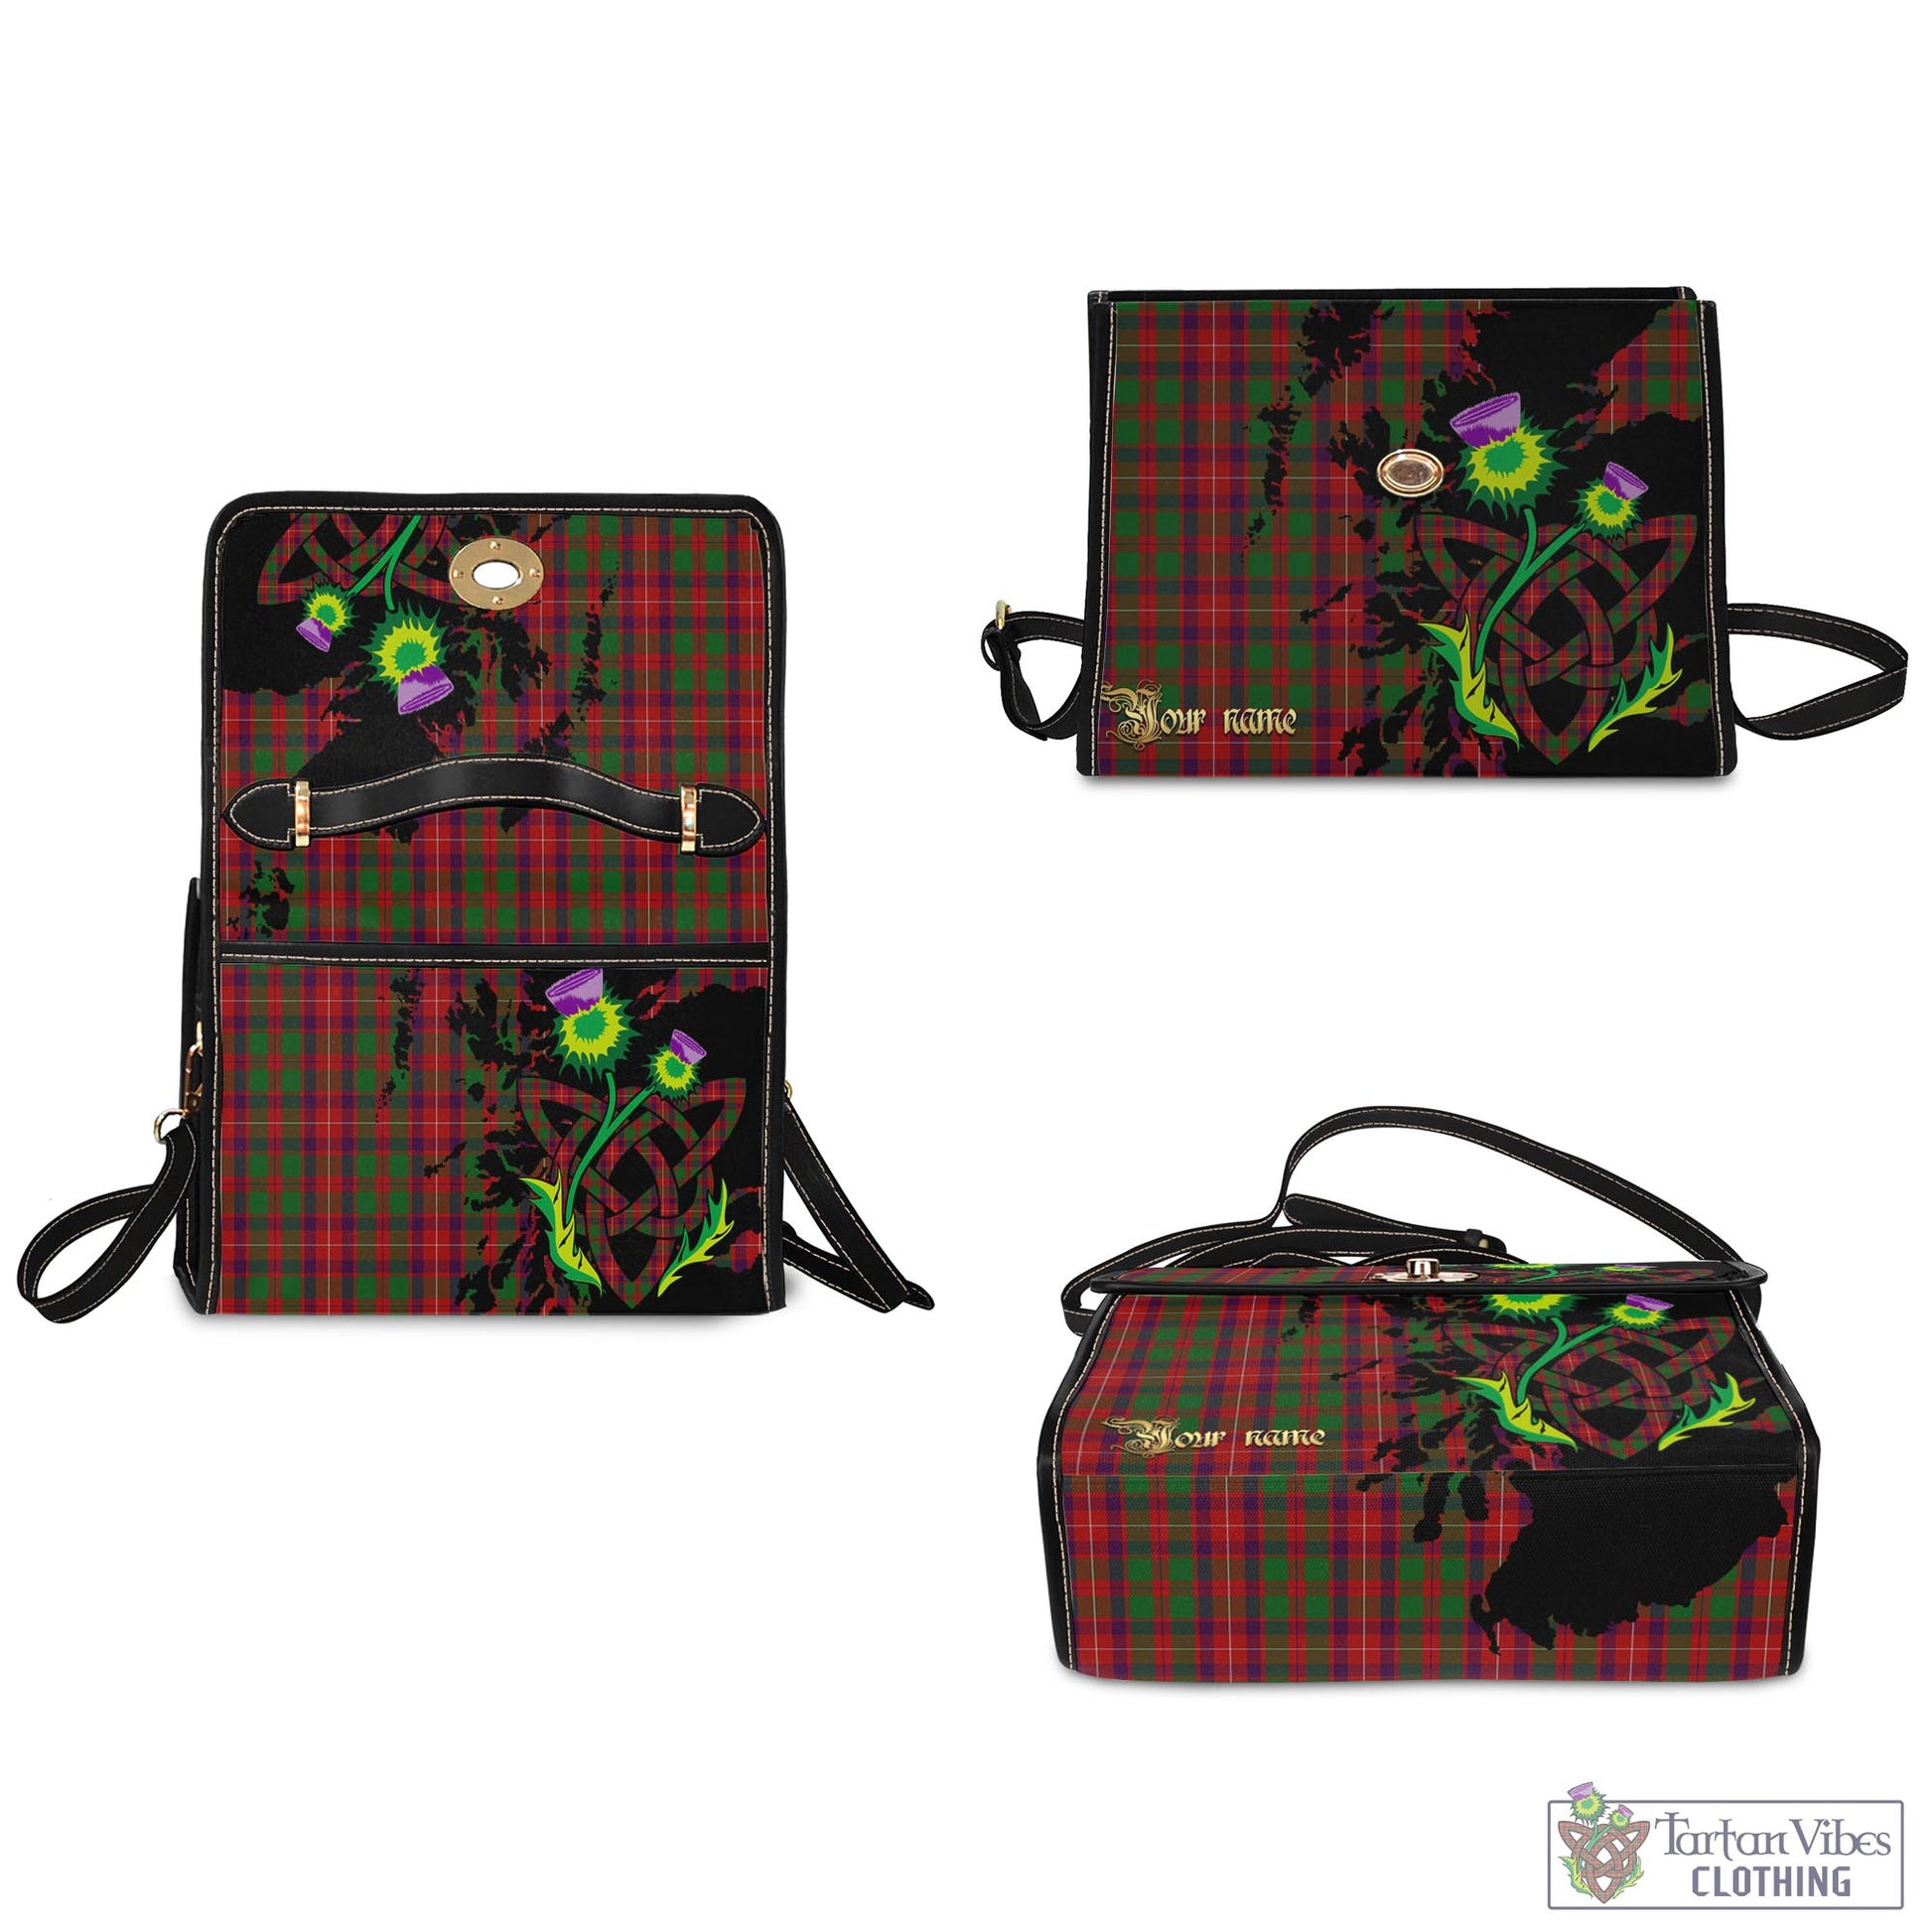 Tartan Vibes Clothing Geddes Tartan Waterproof Canvas Bag with Scotland Map and Thistle Celtic Accents